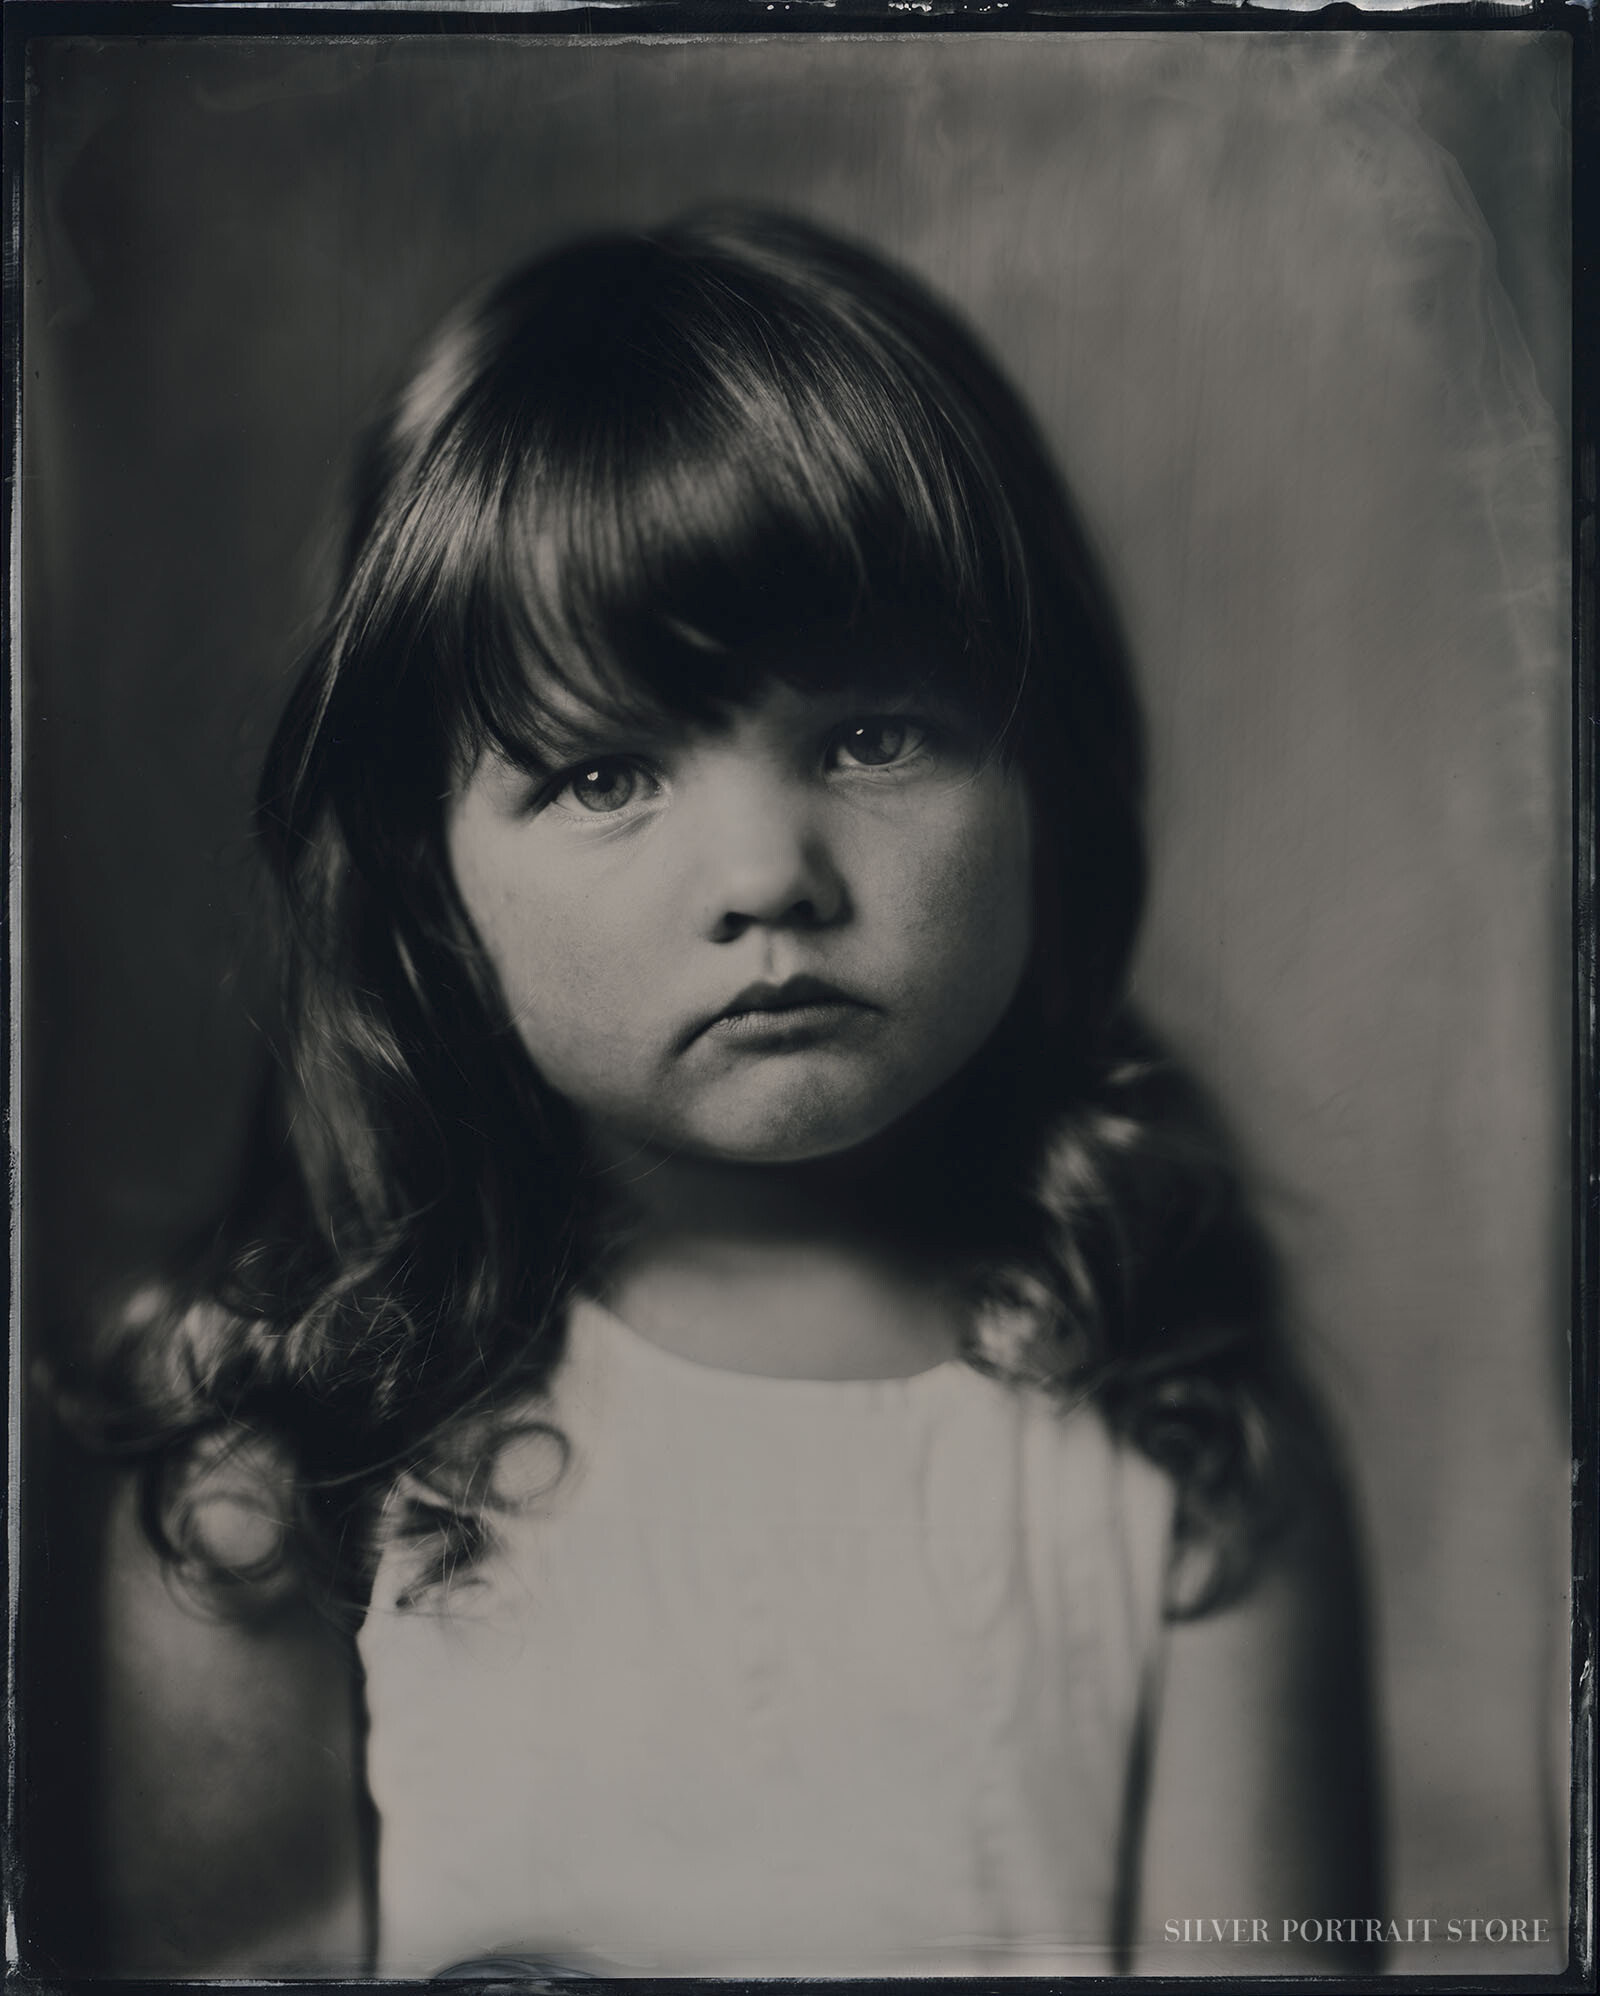 Bobbi-Silver Portrait Store-Scan from Wet plate collodion-Tintype 20 x 25 cm